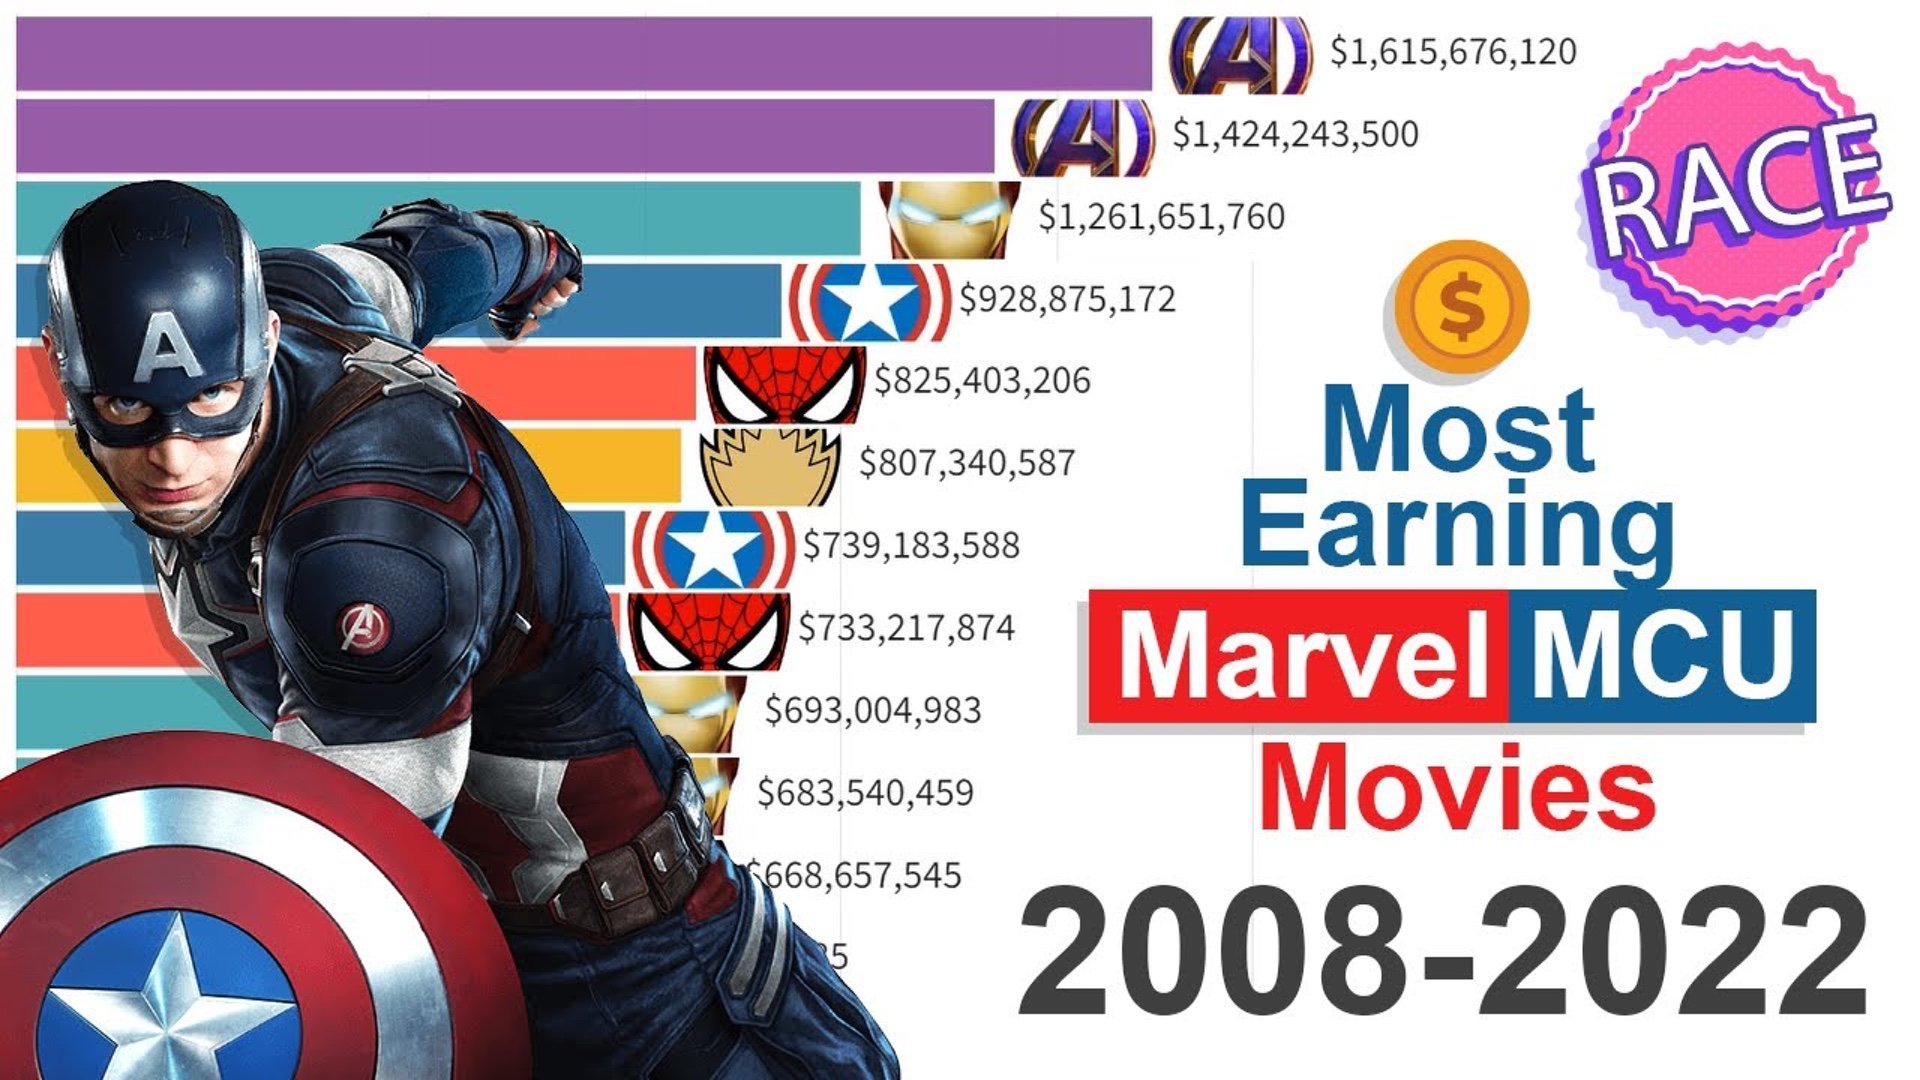 Mesmerizing video viewing of Marvel Studios' topgrossing films from